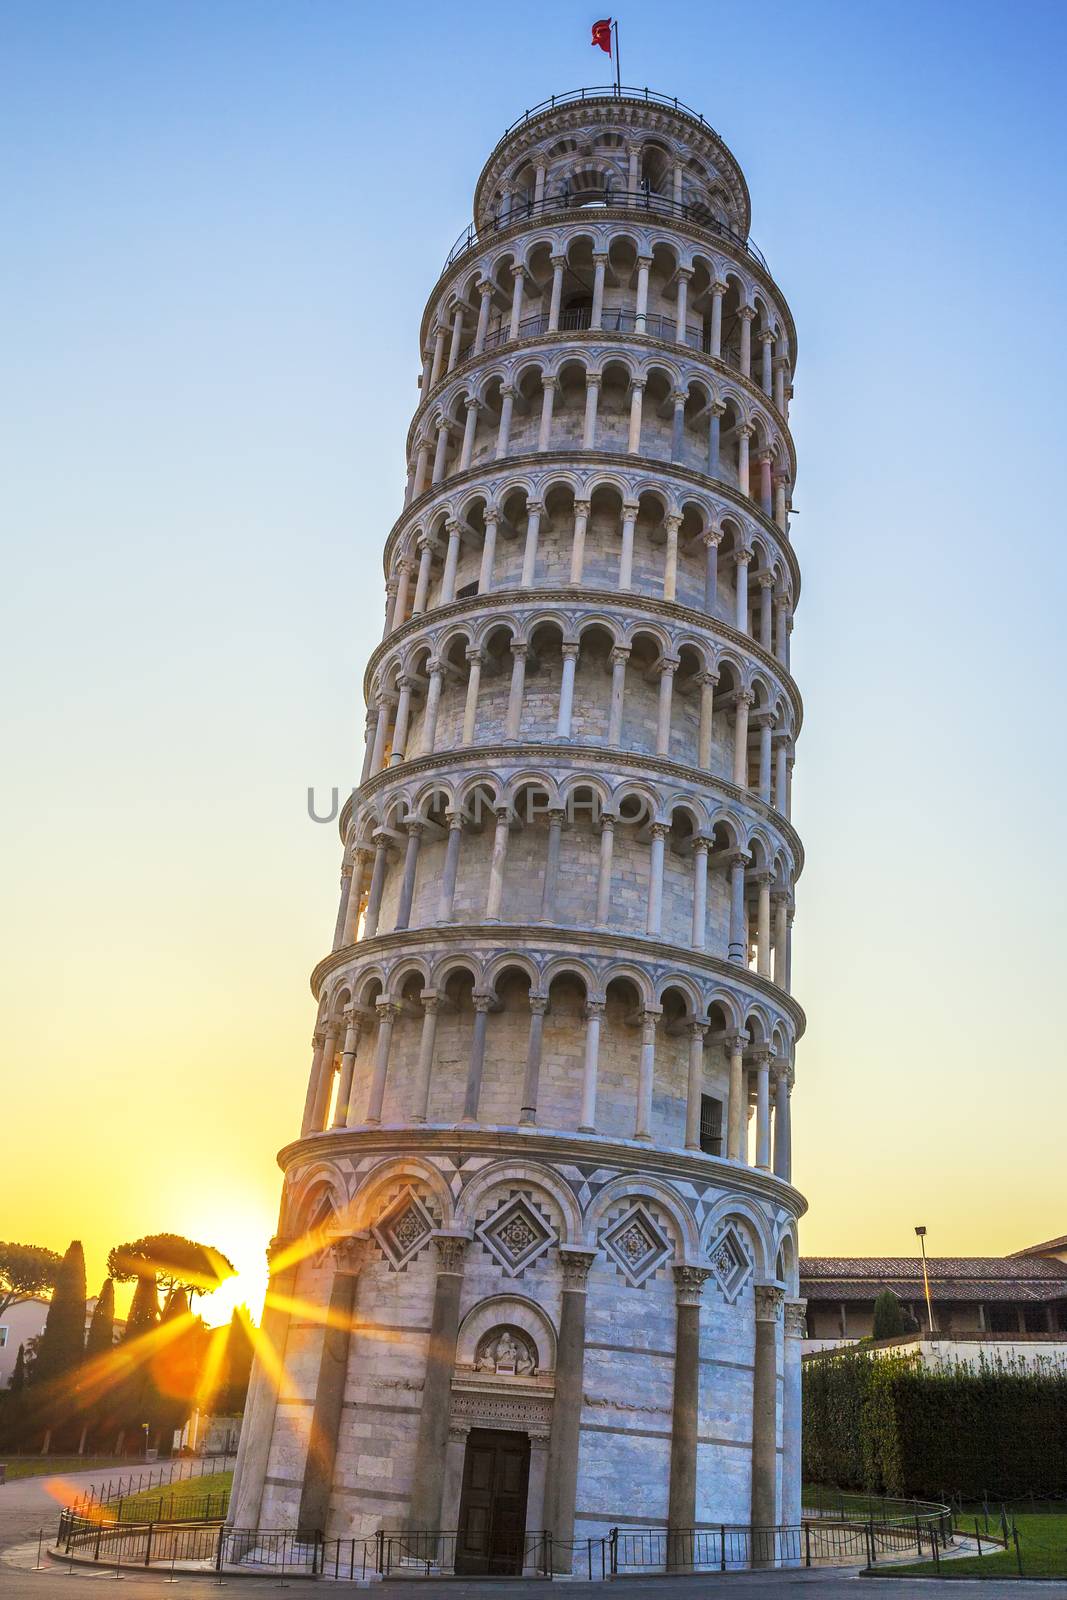 Famous Pisa leaning tower at sunrise, Italy 